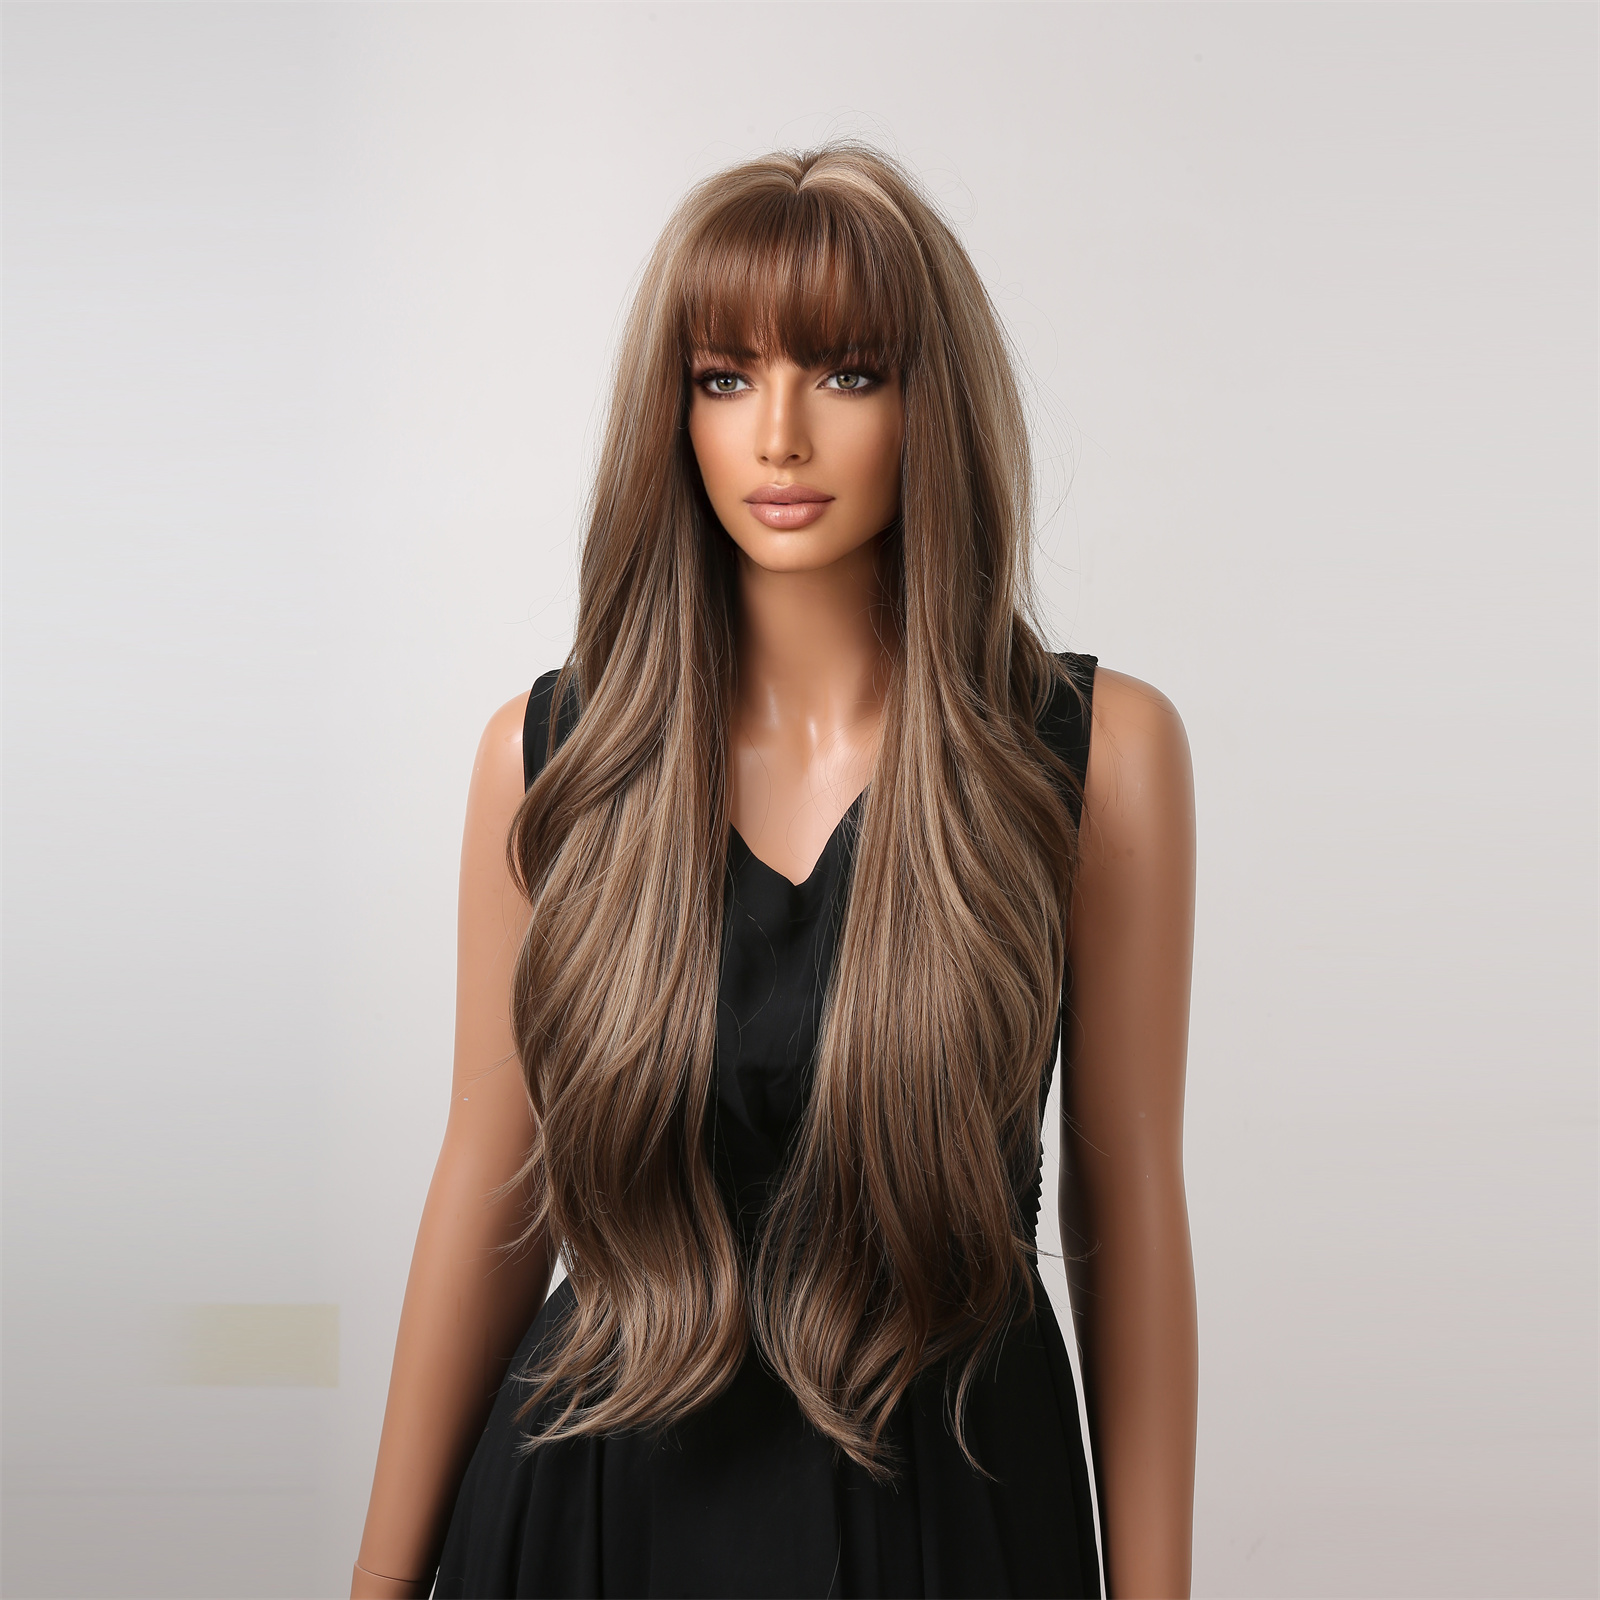 A trendy dark brown wig with long curly hair and bangs, made from synthetic material for easy wear and a stylish appearance